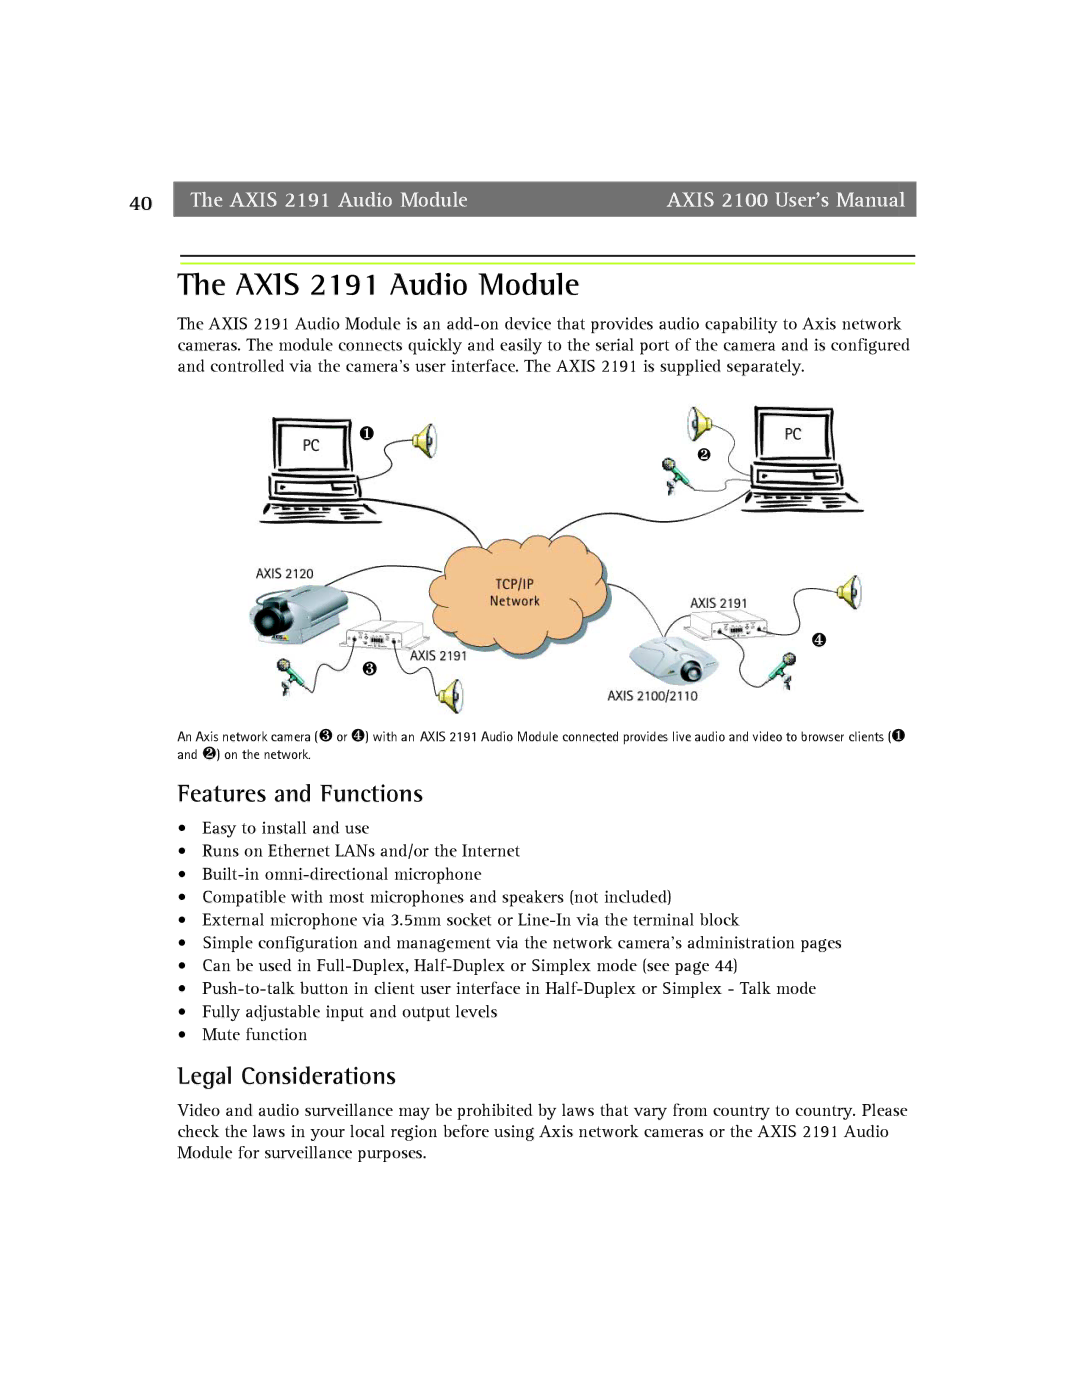 Axis Communications 2100 manual Axis 2191 Audio Module, Features and Functions, Legal Considerations 